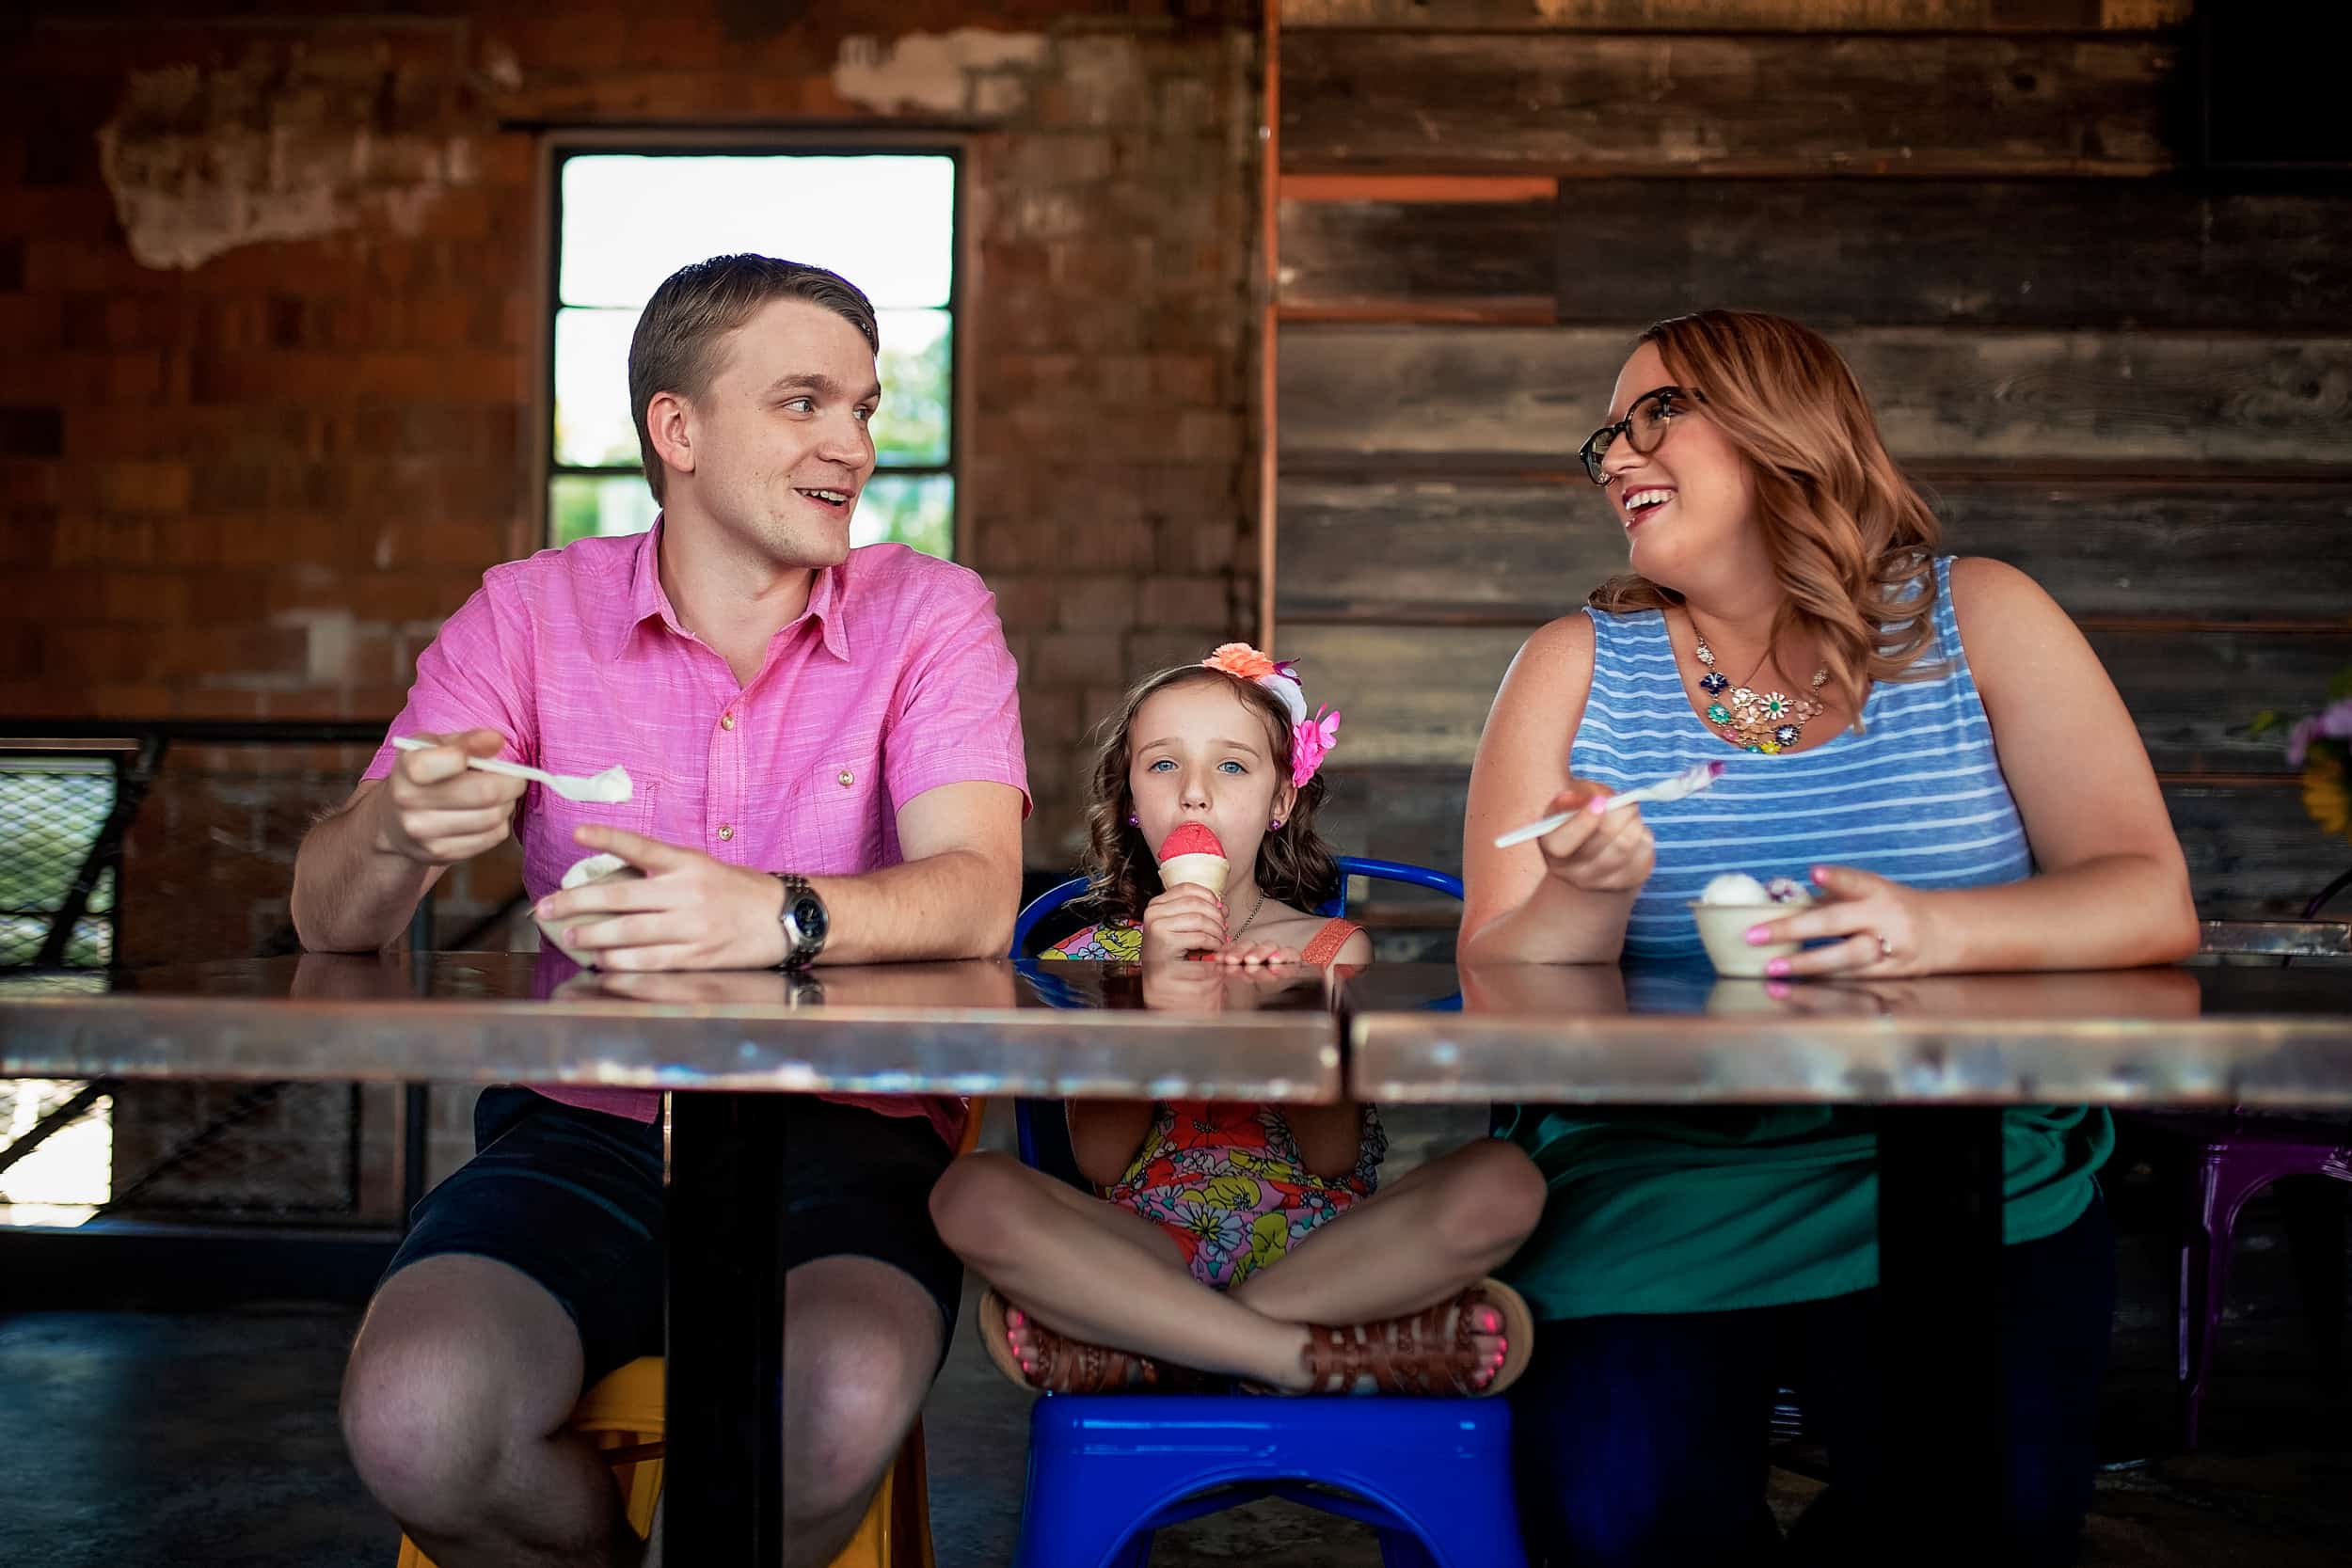 A family sits at a table eating ice cream.